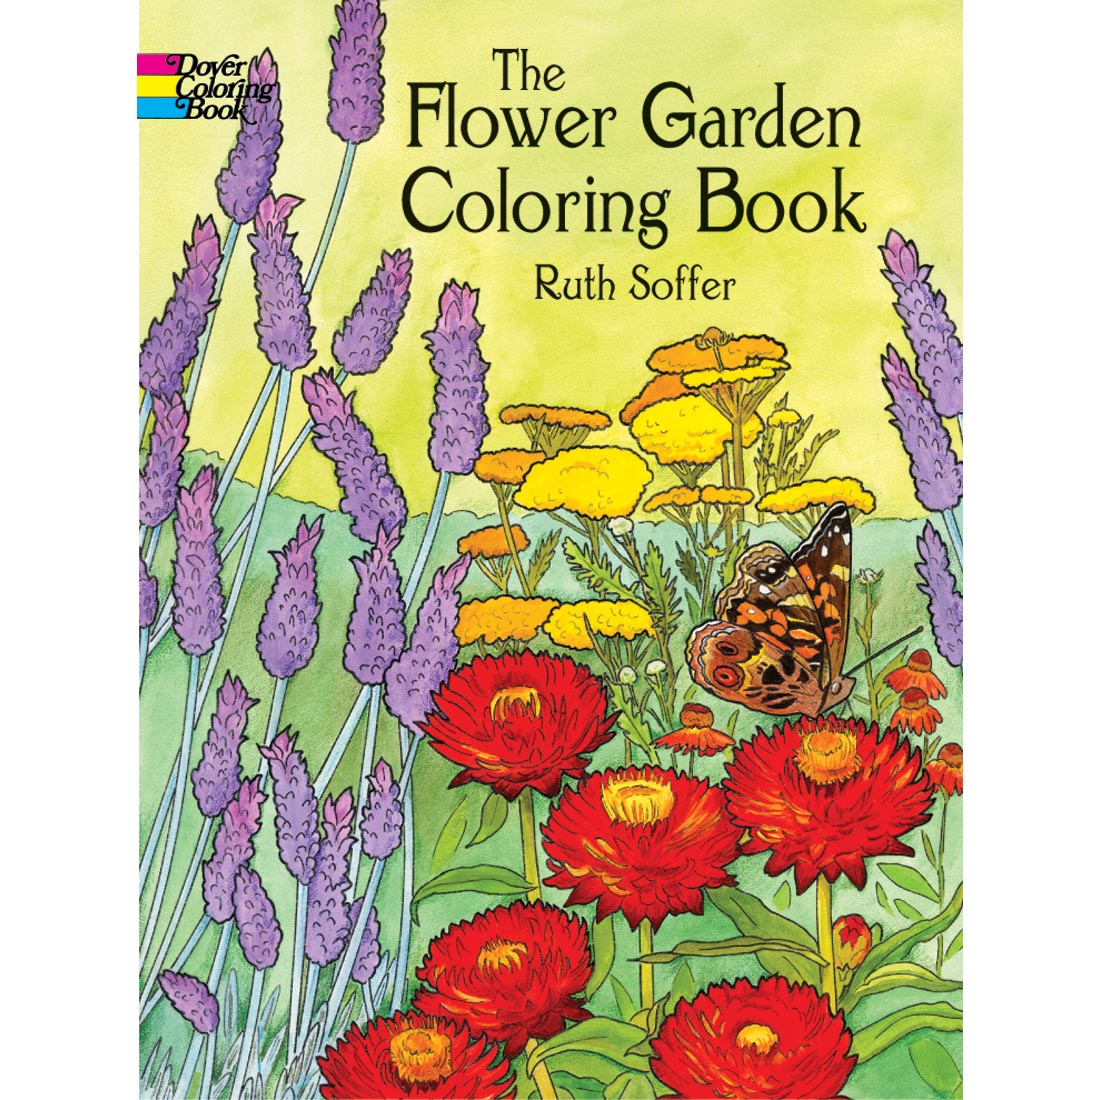 The Flower Garden Coloring Book by Dover